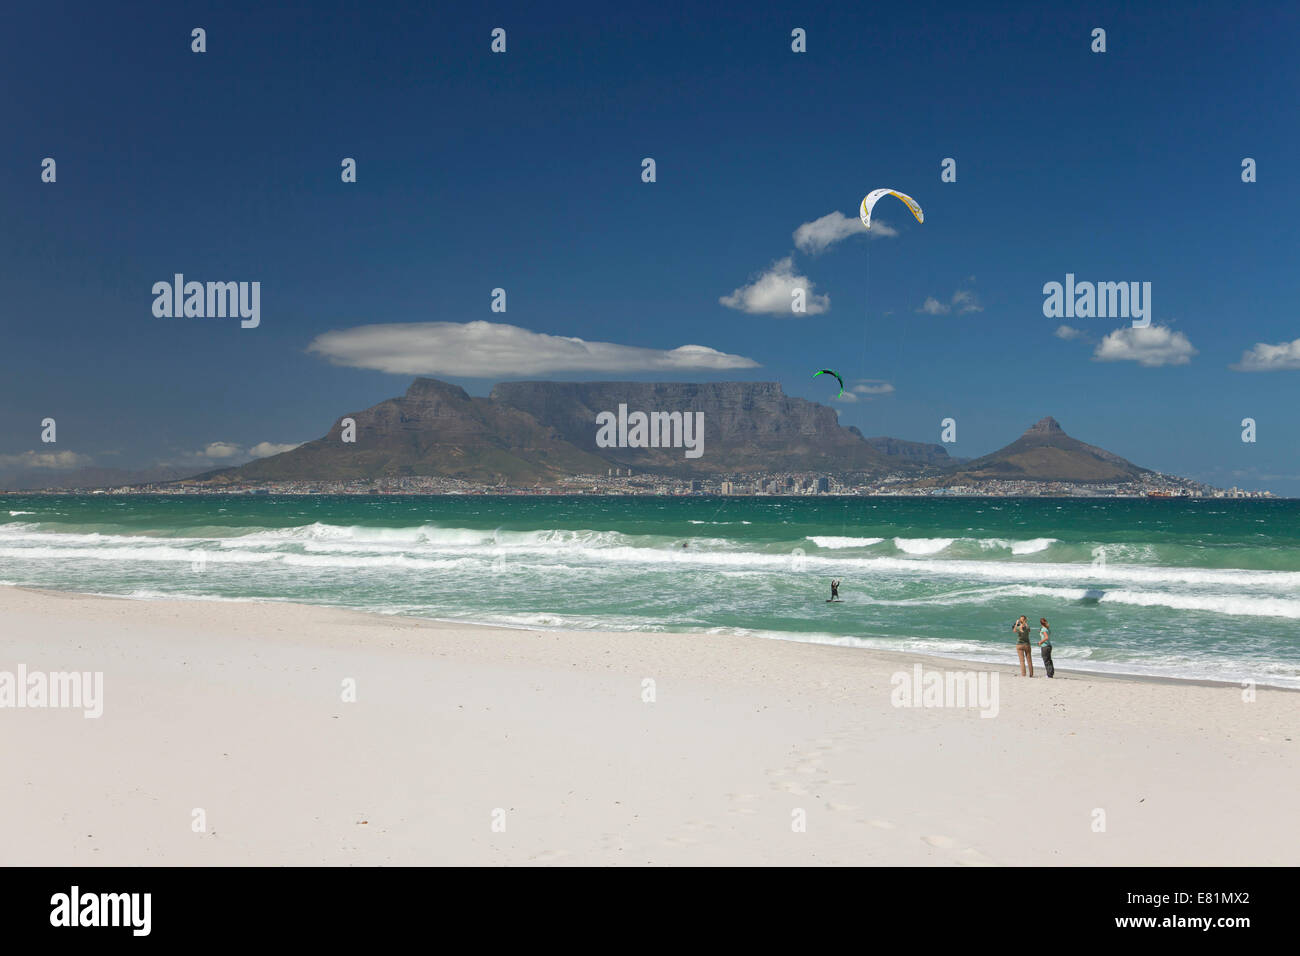 Bloubergstrand beach, looking towards Cape Town and Table Mountain, Western Cape, South Africa Stock Photo